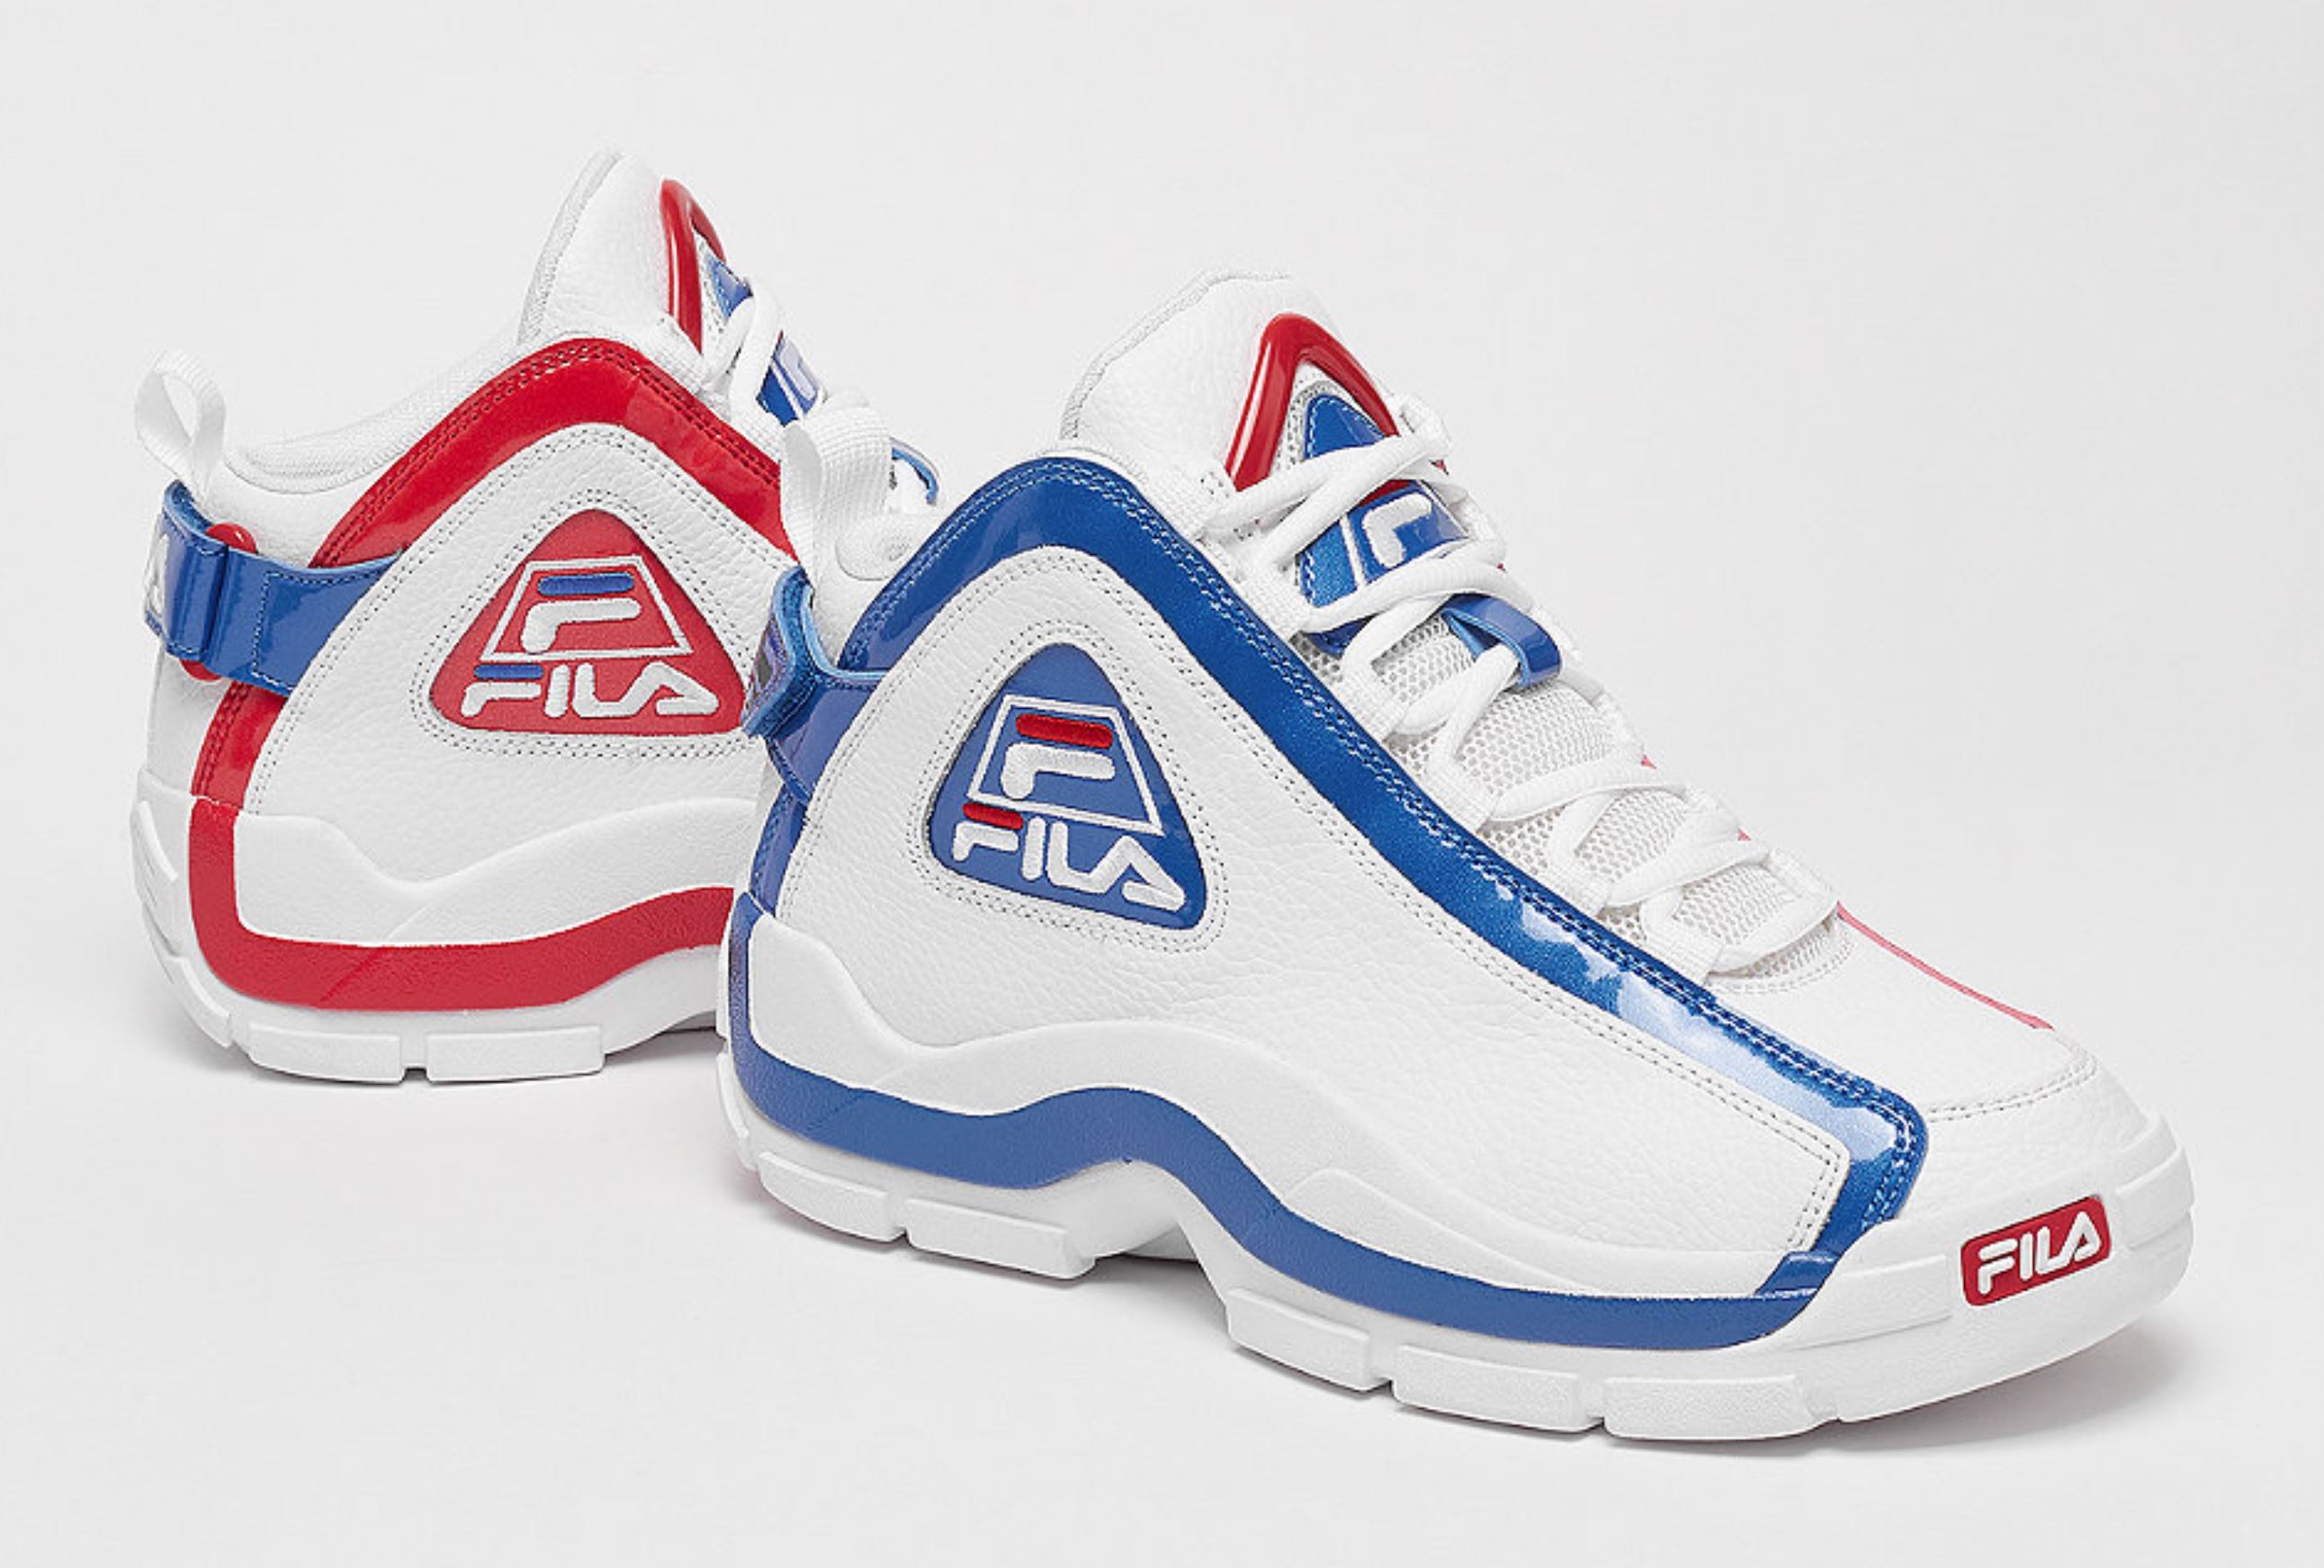 Snipes Celebrates with New Fila 96 Collaboration - WearTesters